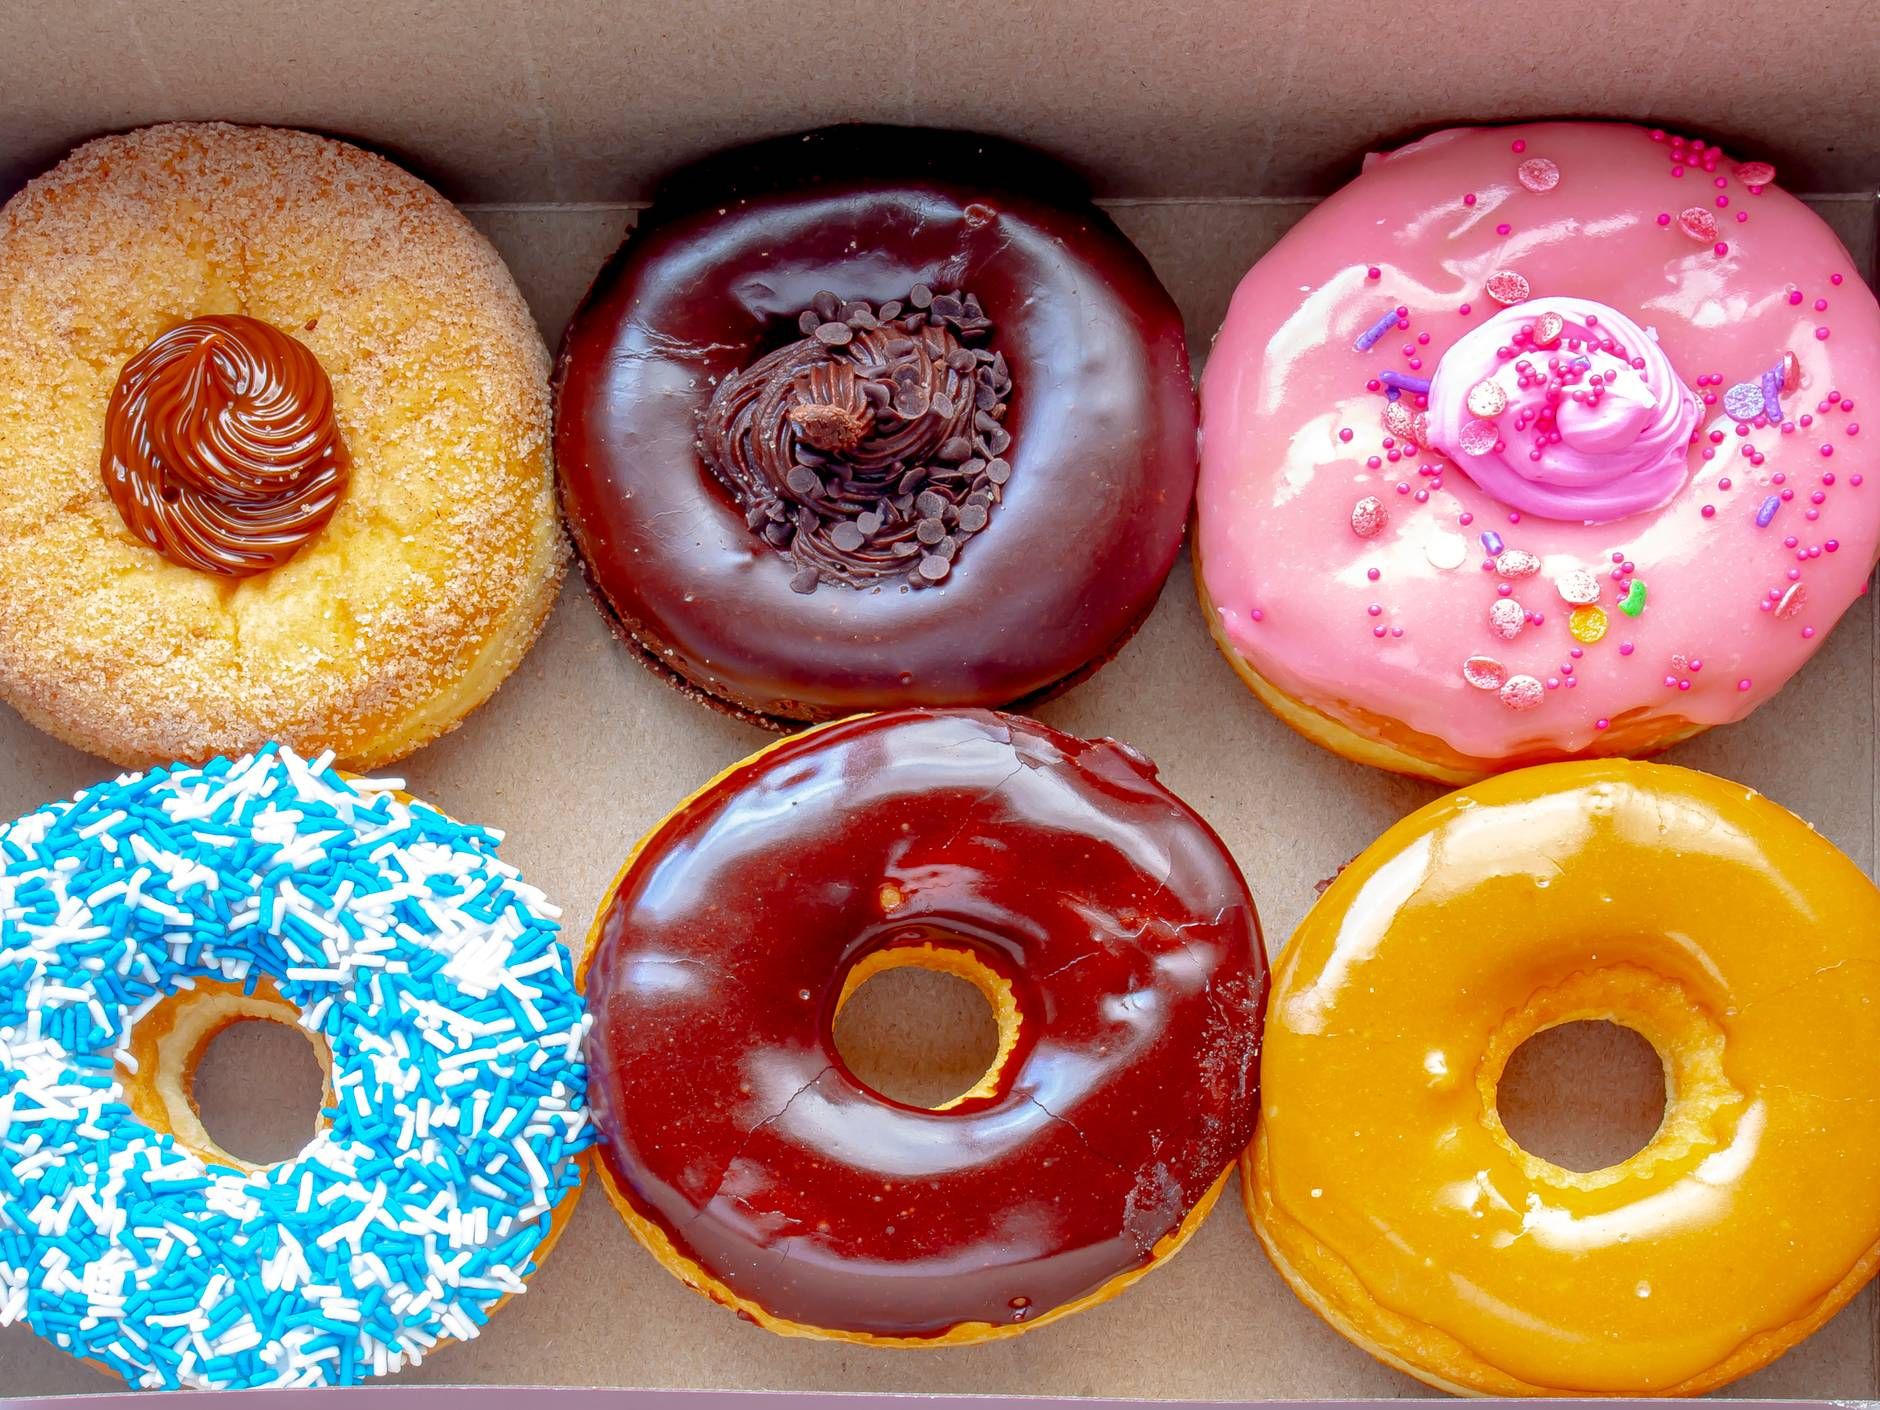 Krispy Kreme is offering a year of free  donuts to the vaccinated in 2021. Should the innoculated get a reward?